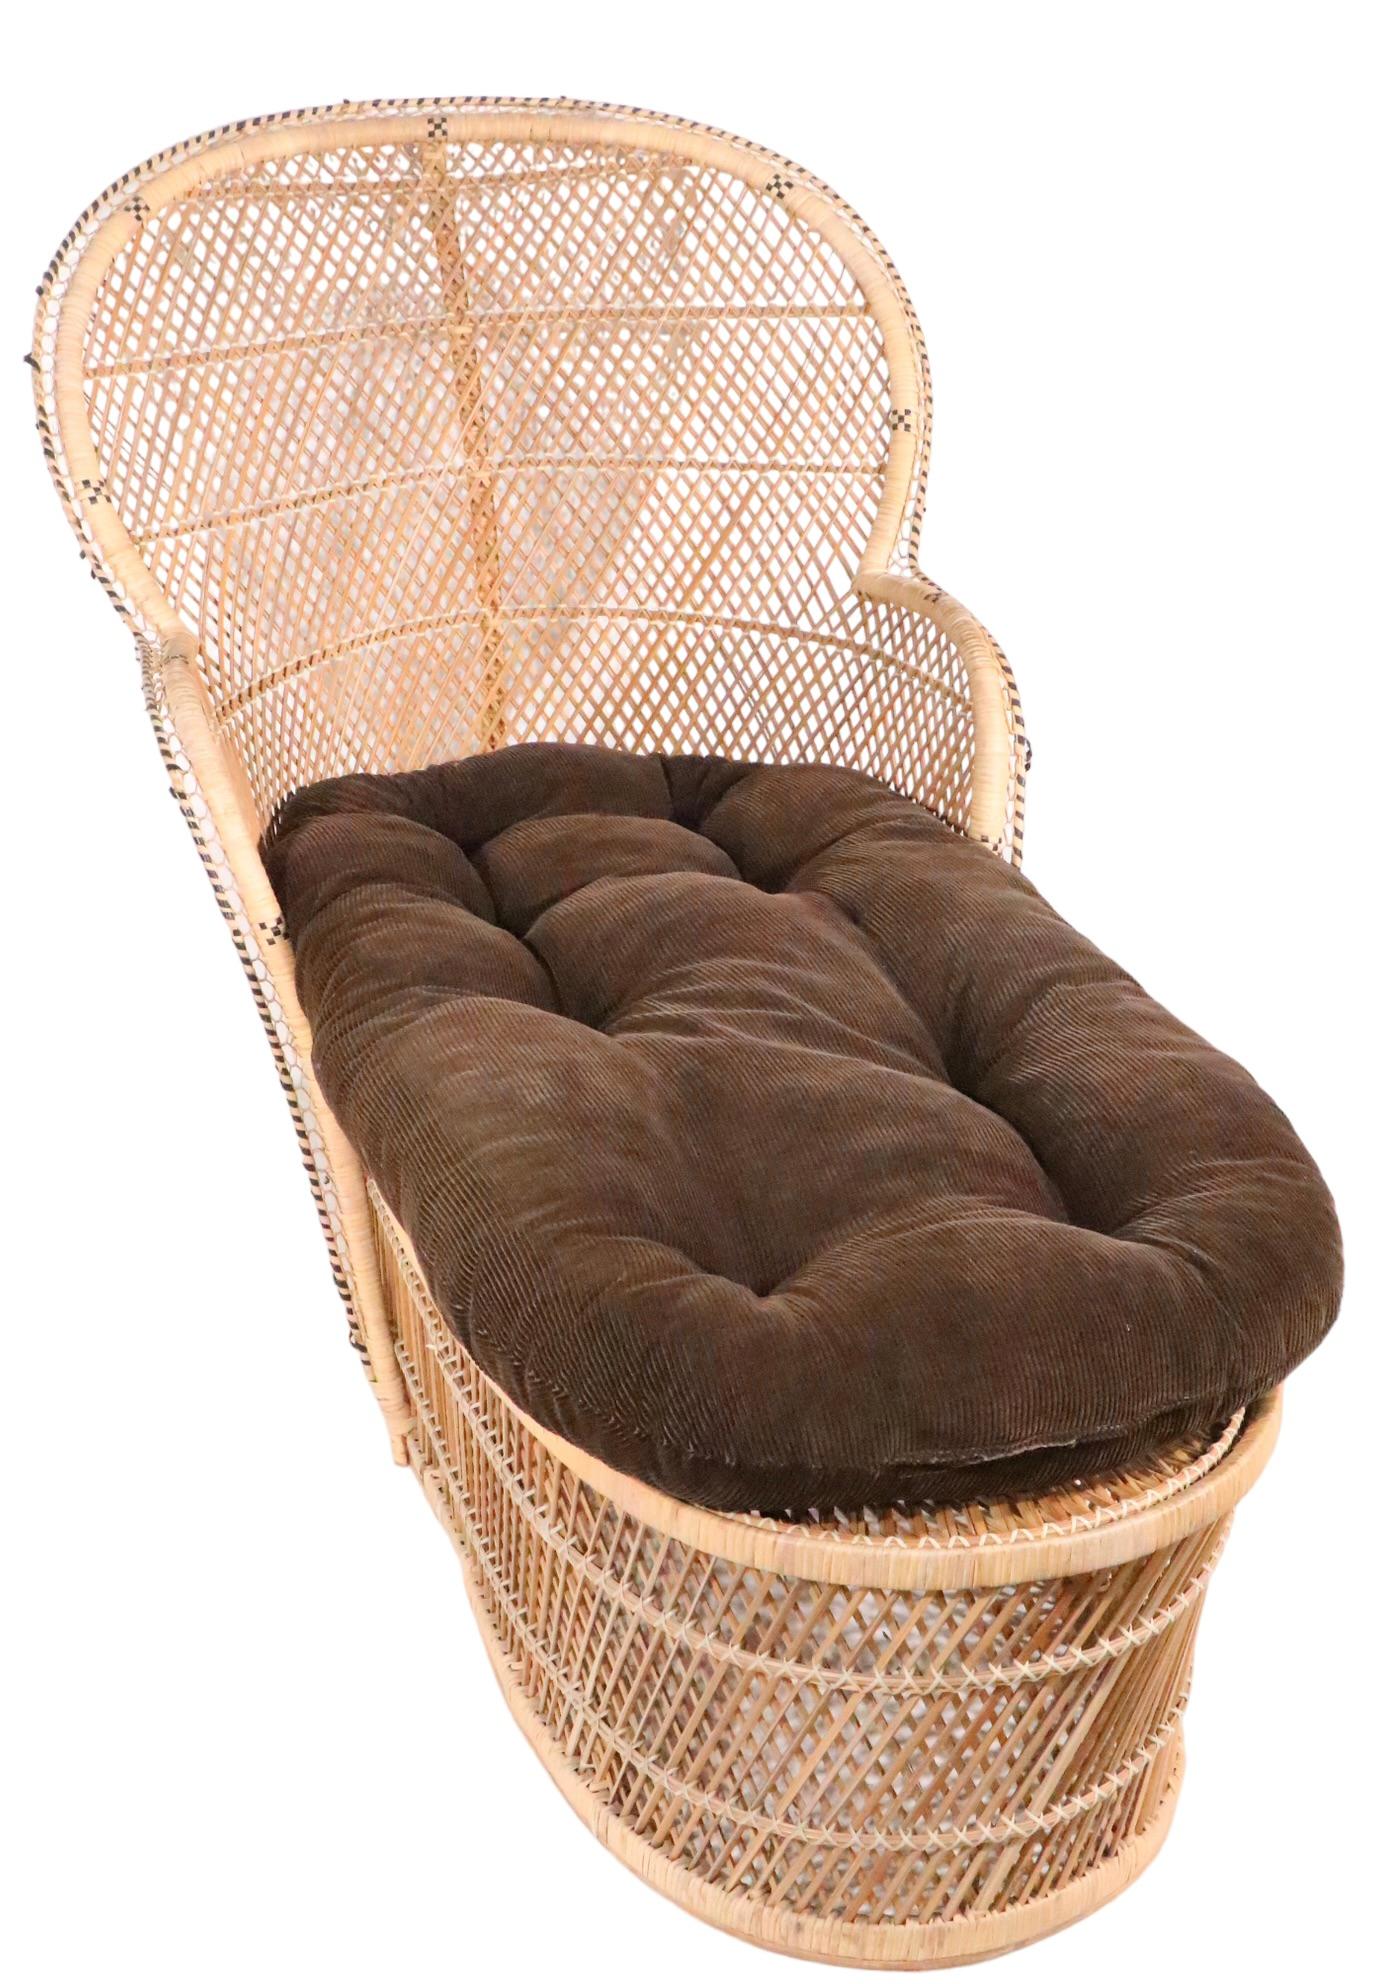 Woven Wicker Peacock Style Chaise Lounge c 1970's In Good Condition For Sale In New York, NY